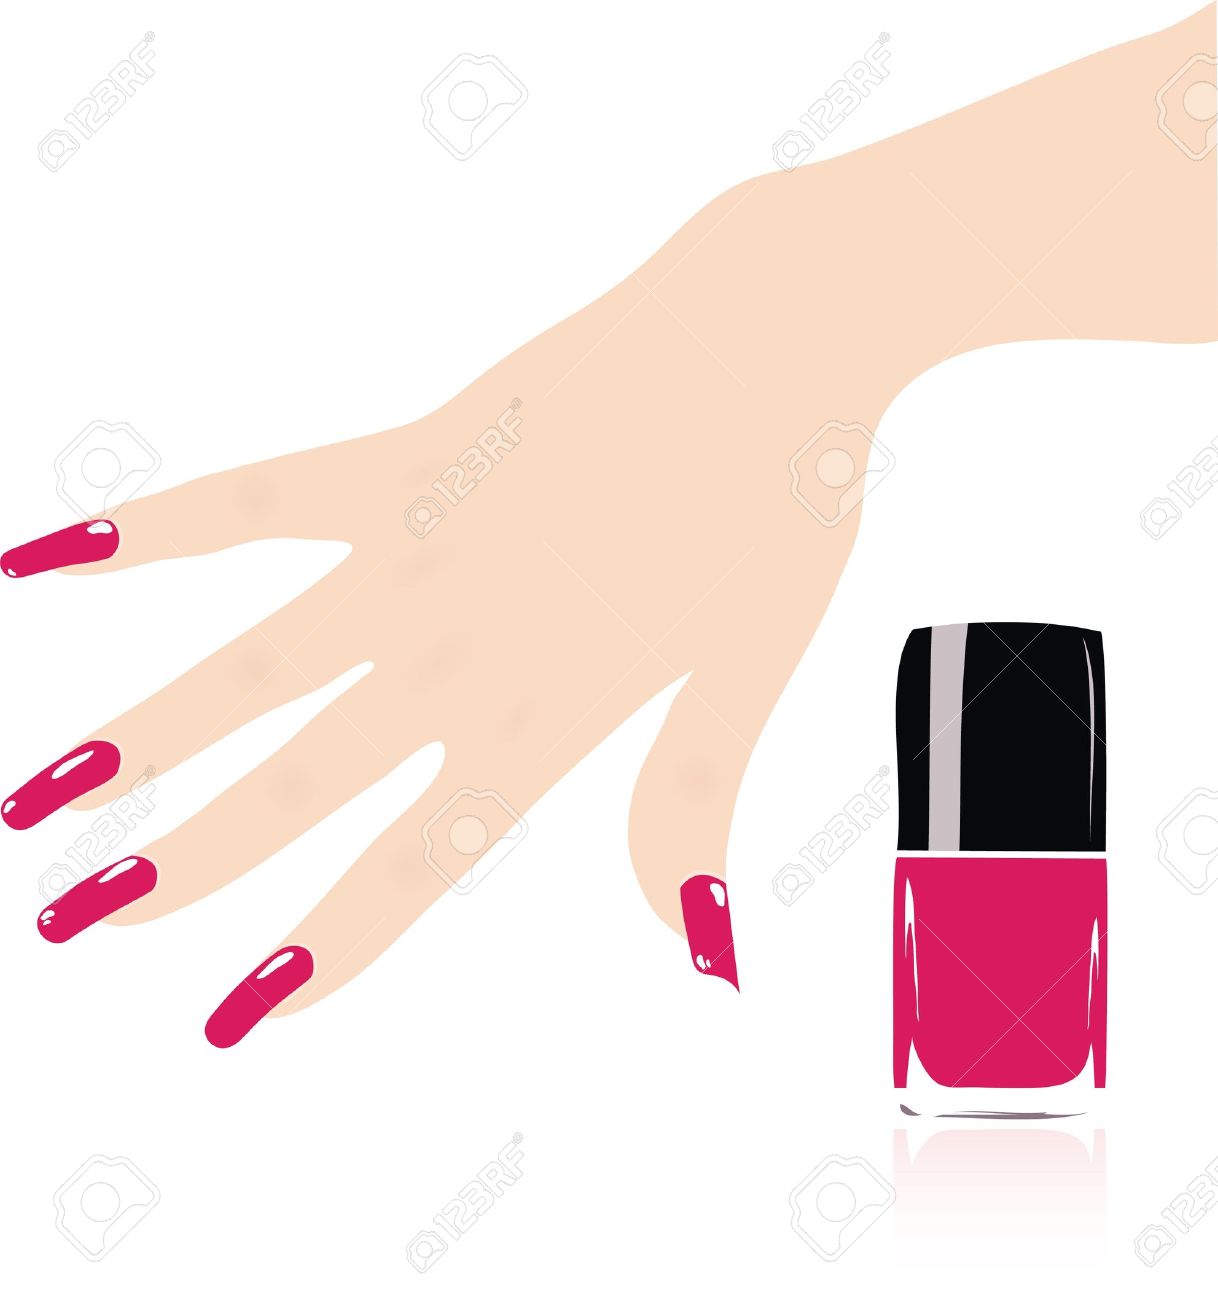 Nails clipart #2, Download drawings